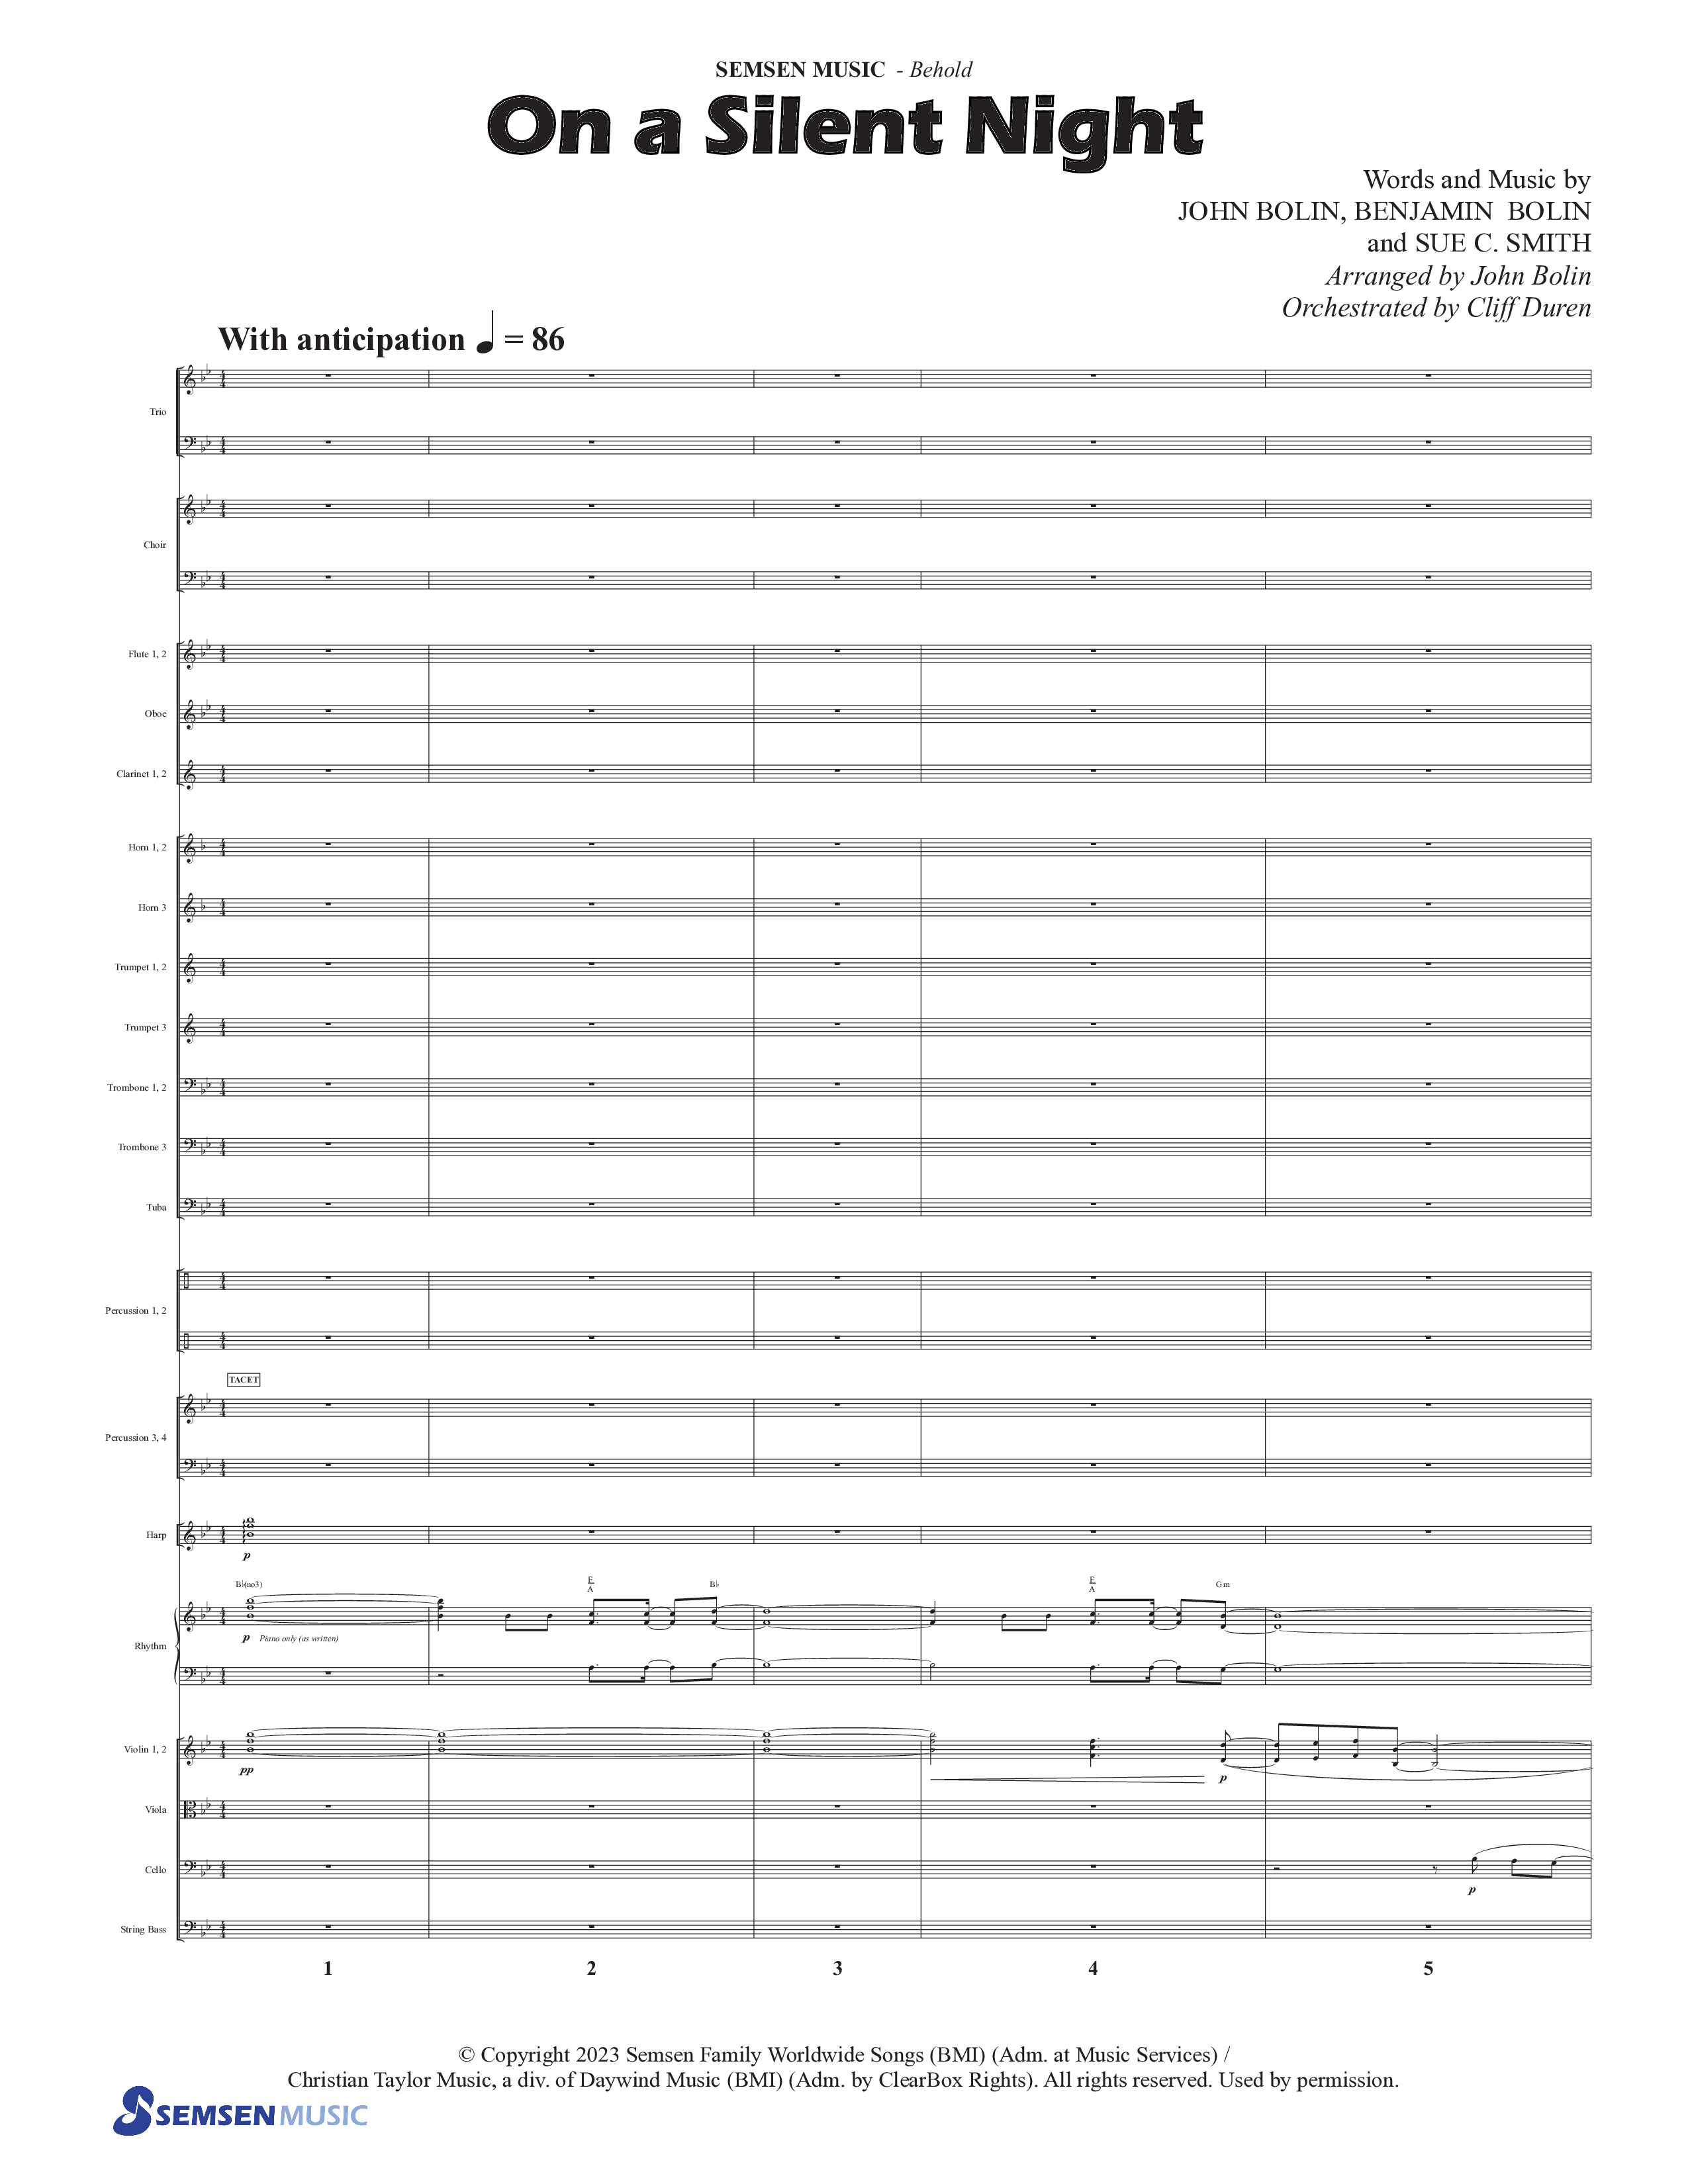 Behold (9 Song Choral Collection) Song 4 (Orchestration) (Semsen Music / Arr. John Bolin / Orch. Cliff Duren)